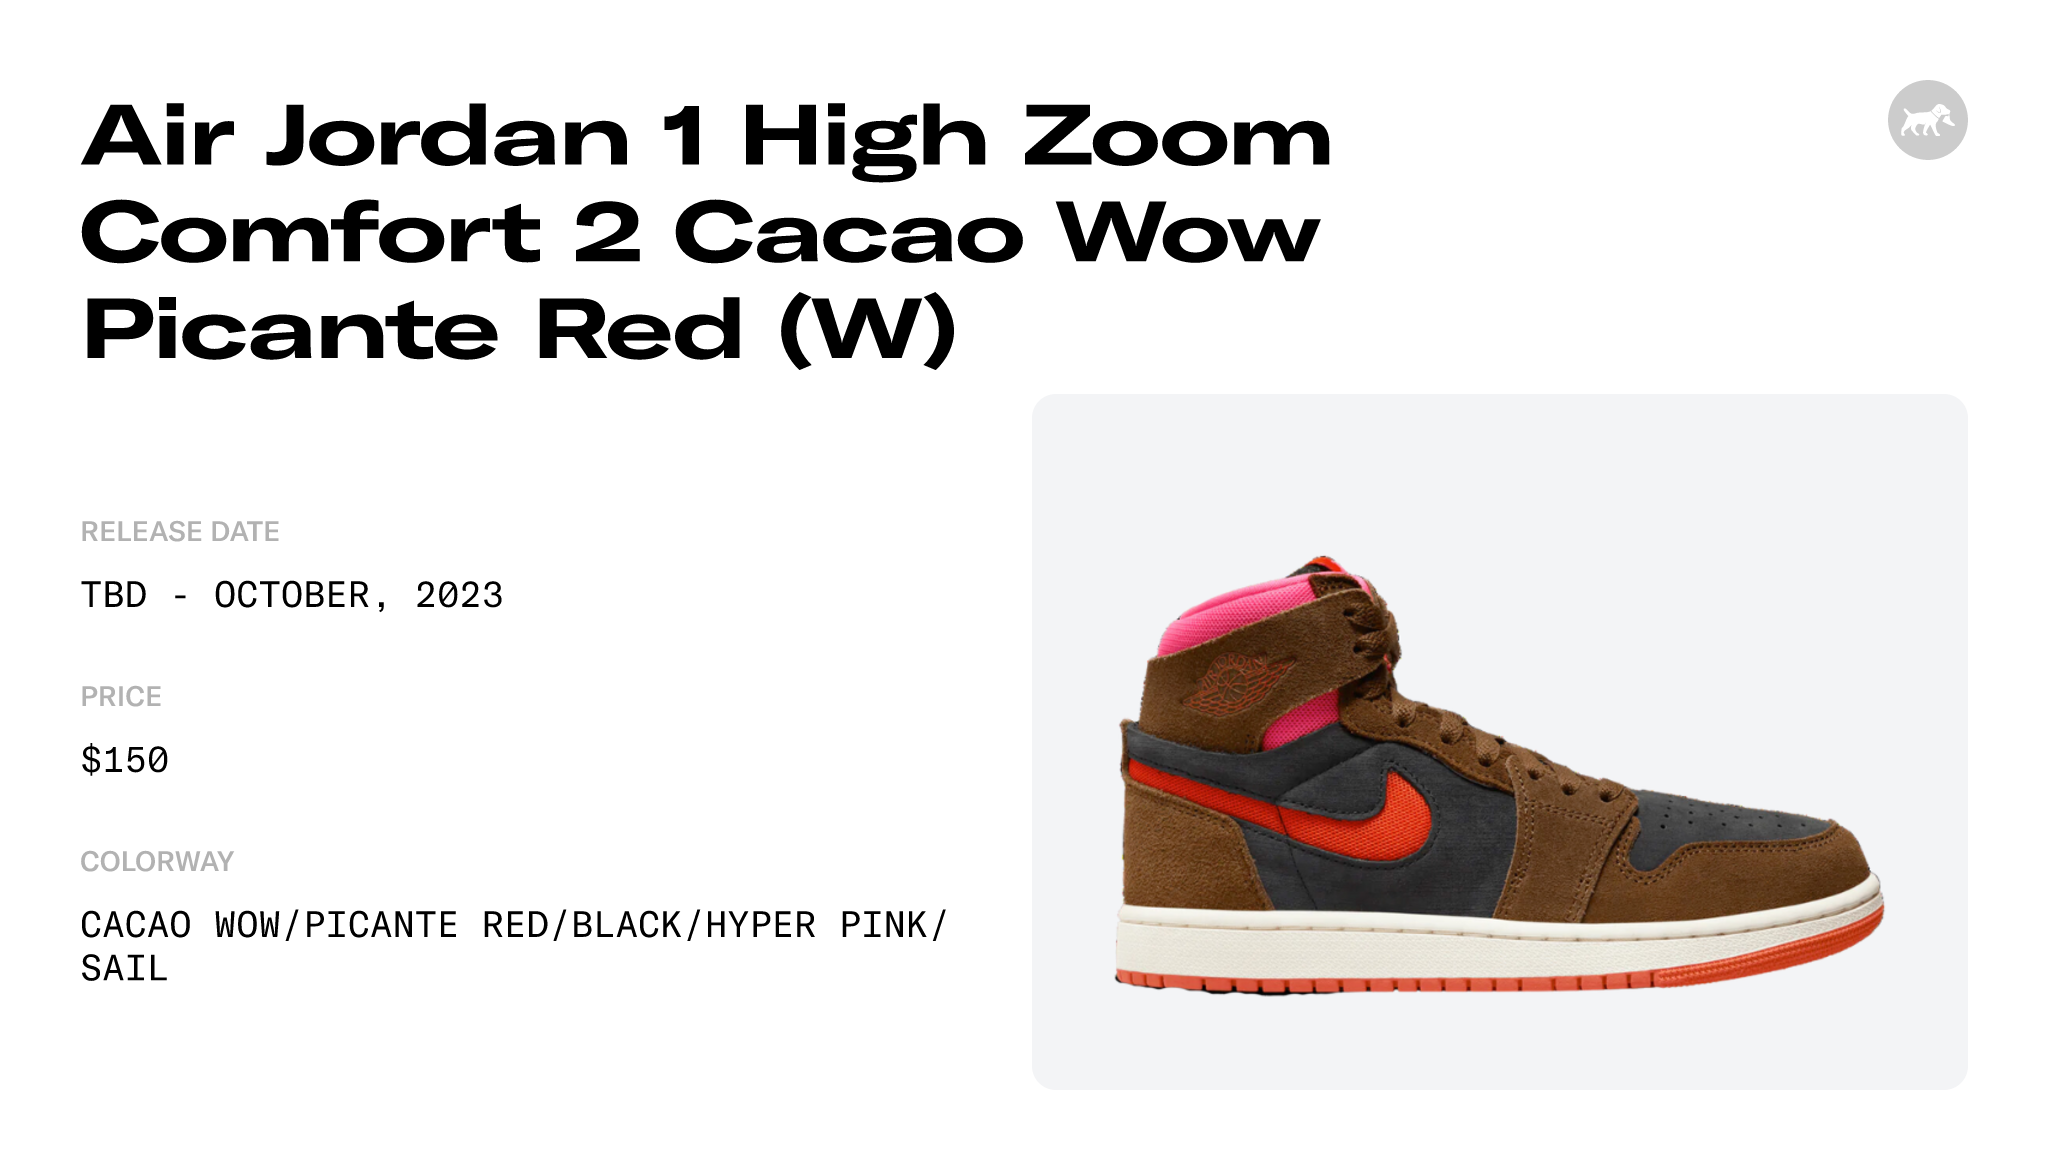 https://www.soleretriever.com/og/product/air-jordan-1-high-zoom-comfort-2-cacao-wow-picante-red-w-dv1305-206